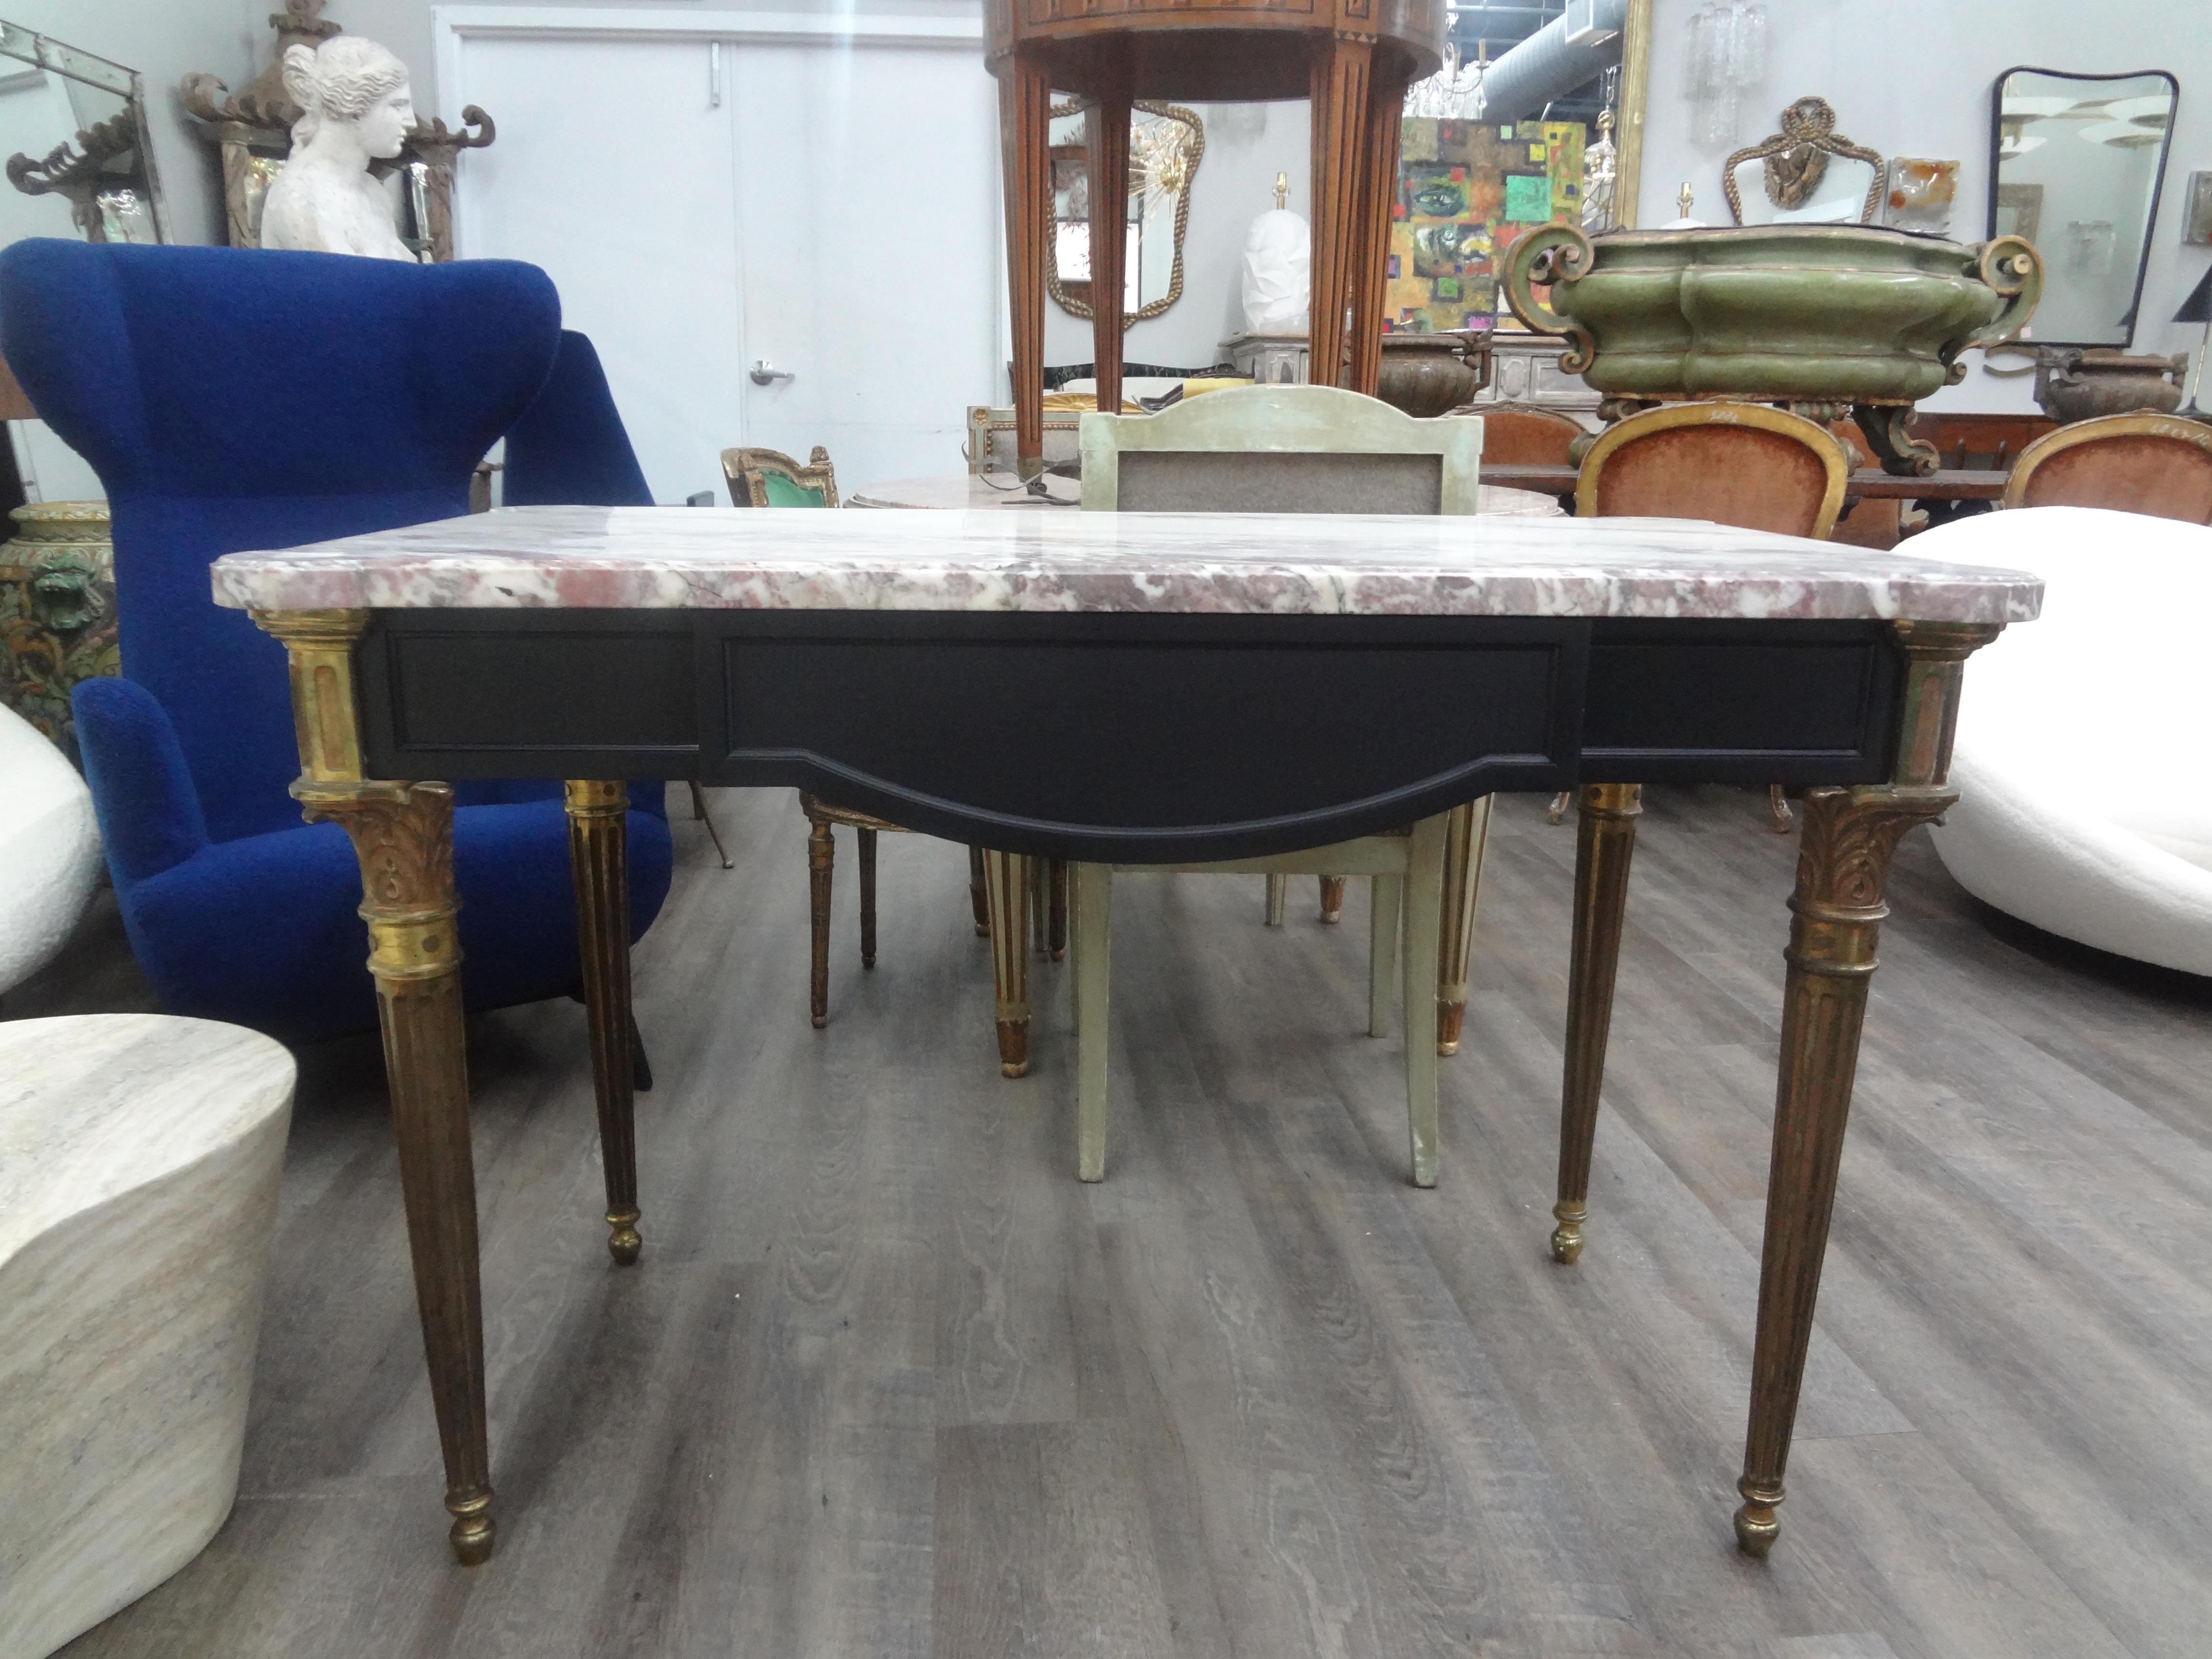 19th Century French Louis XVI Style Ebonized Desk.
Outstanding 19th century French Louis XVI style desk, writing table, bureau plat or center table with a single drawer, solid bronze legs and the original sculpted marble top.
This stunning desk